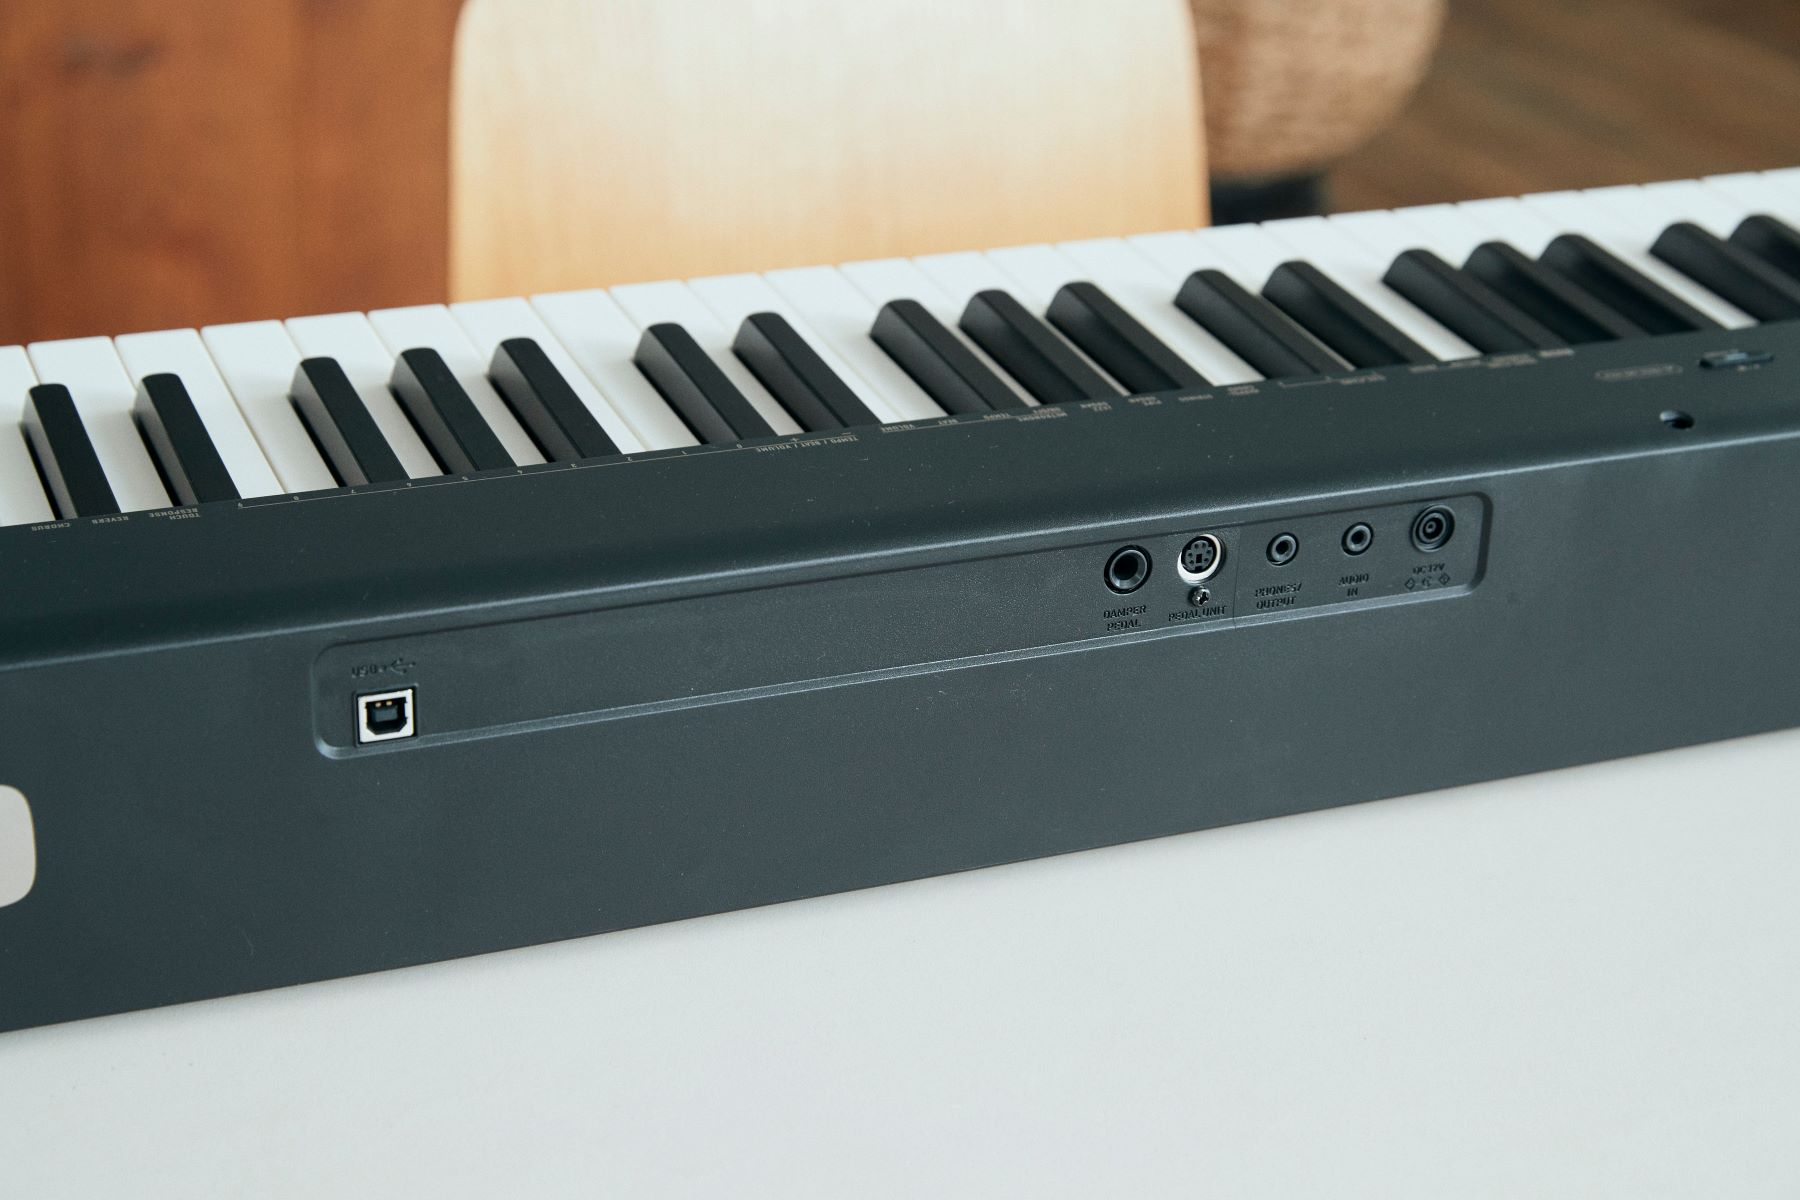 How Do You Find Output Ports On A Digital Piano